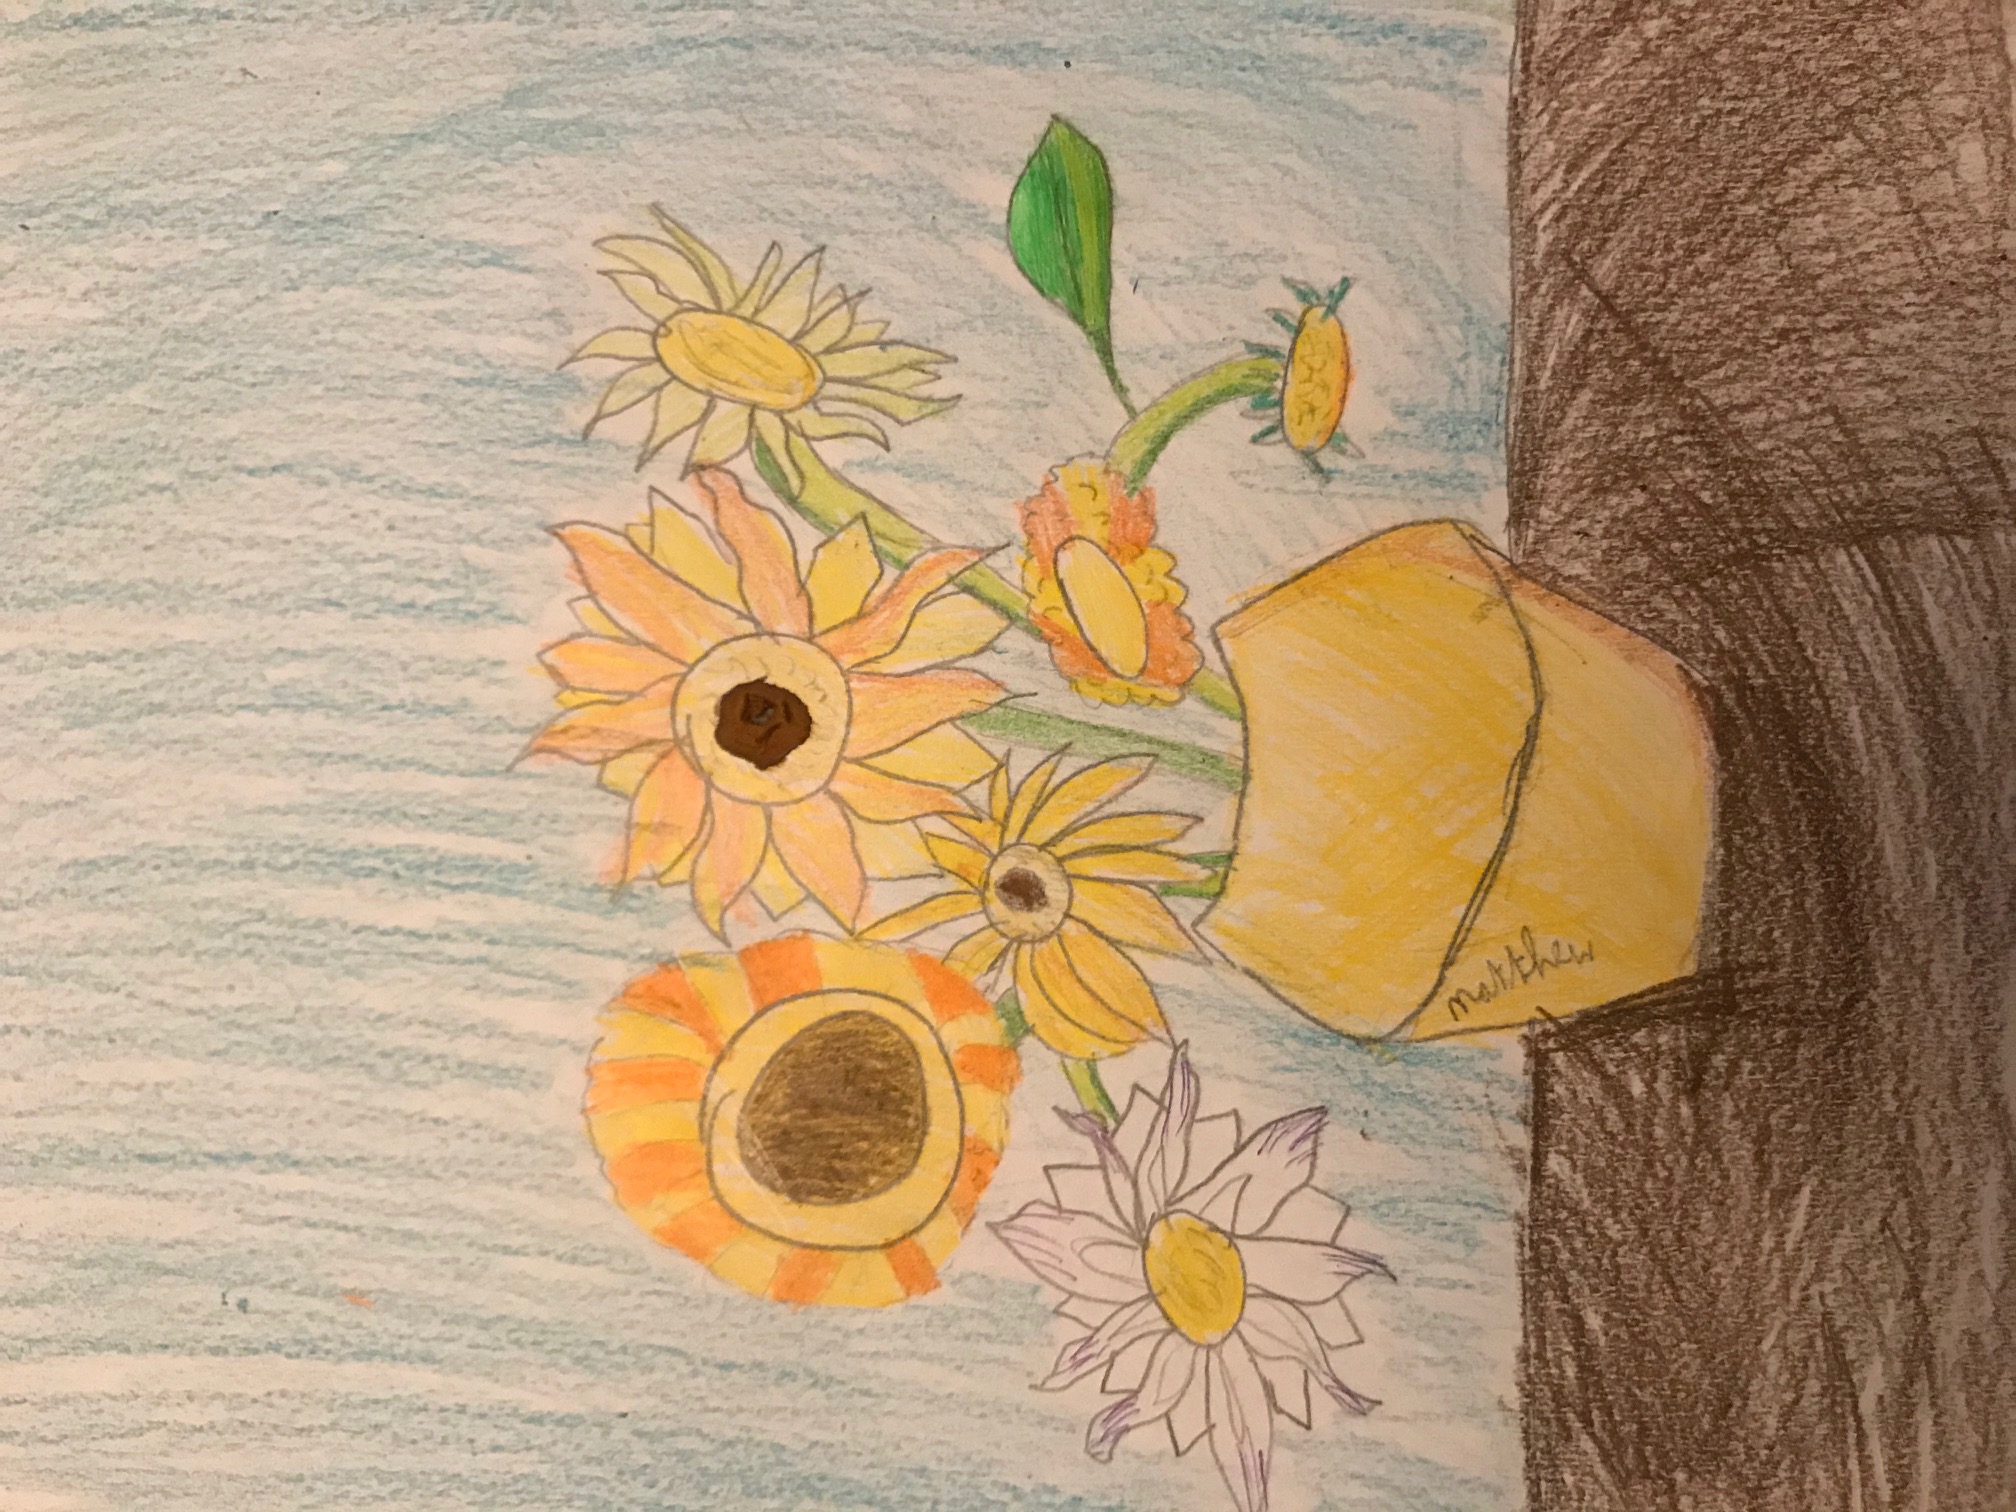 'Sunflowers' by Matthew (9) from Laois